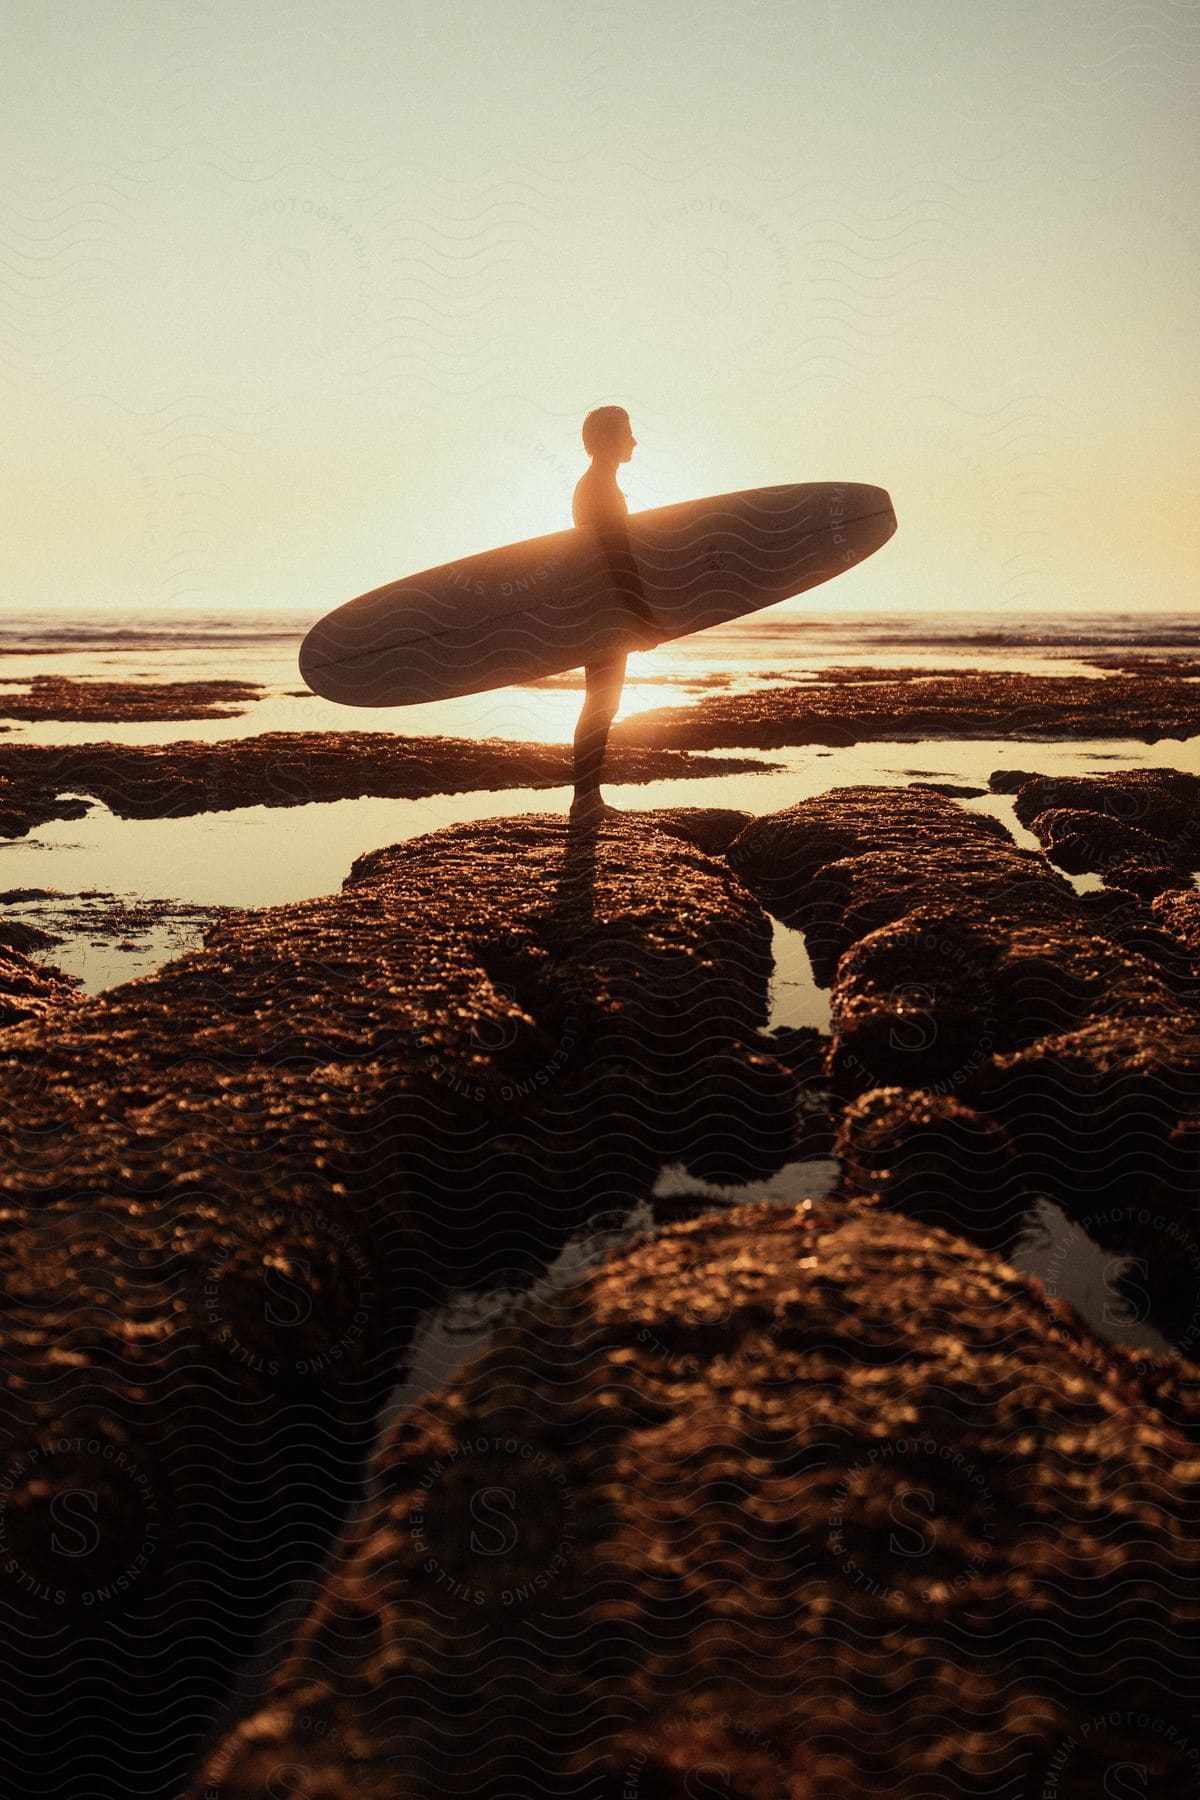 A man holding a surfboard is standing on a rocky beach at sunset.